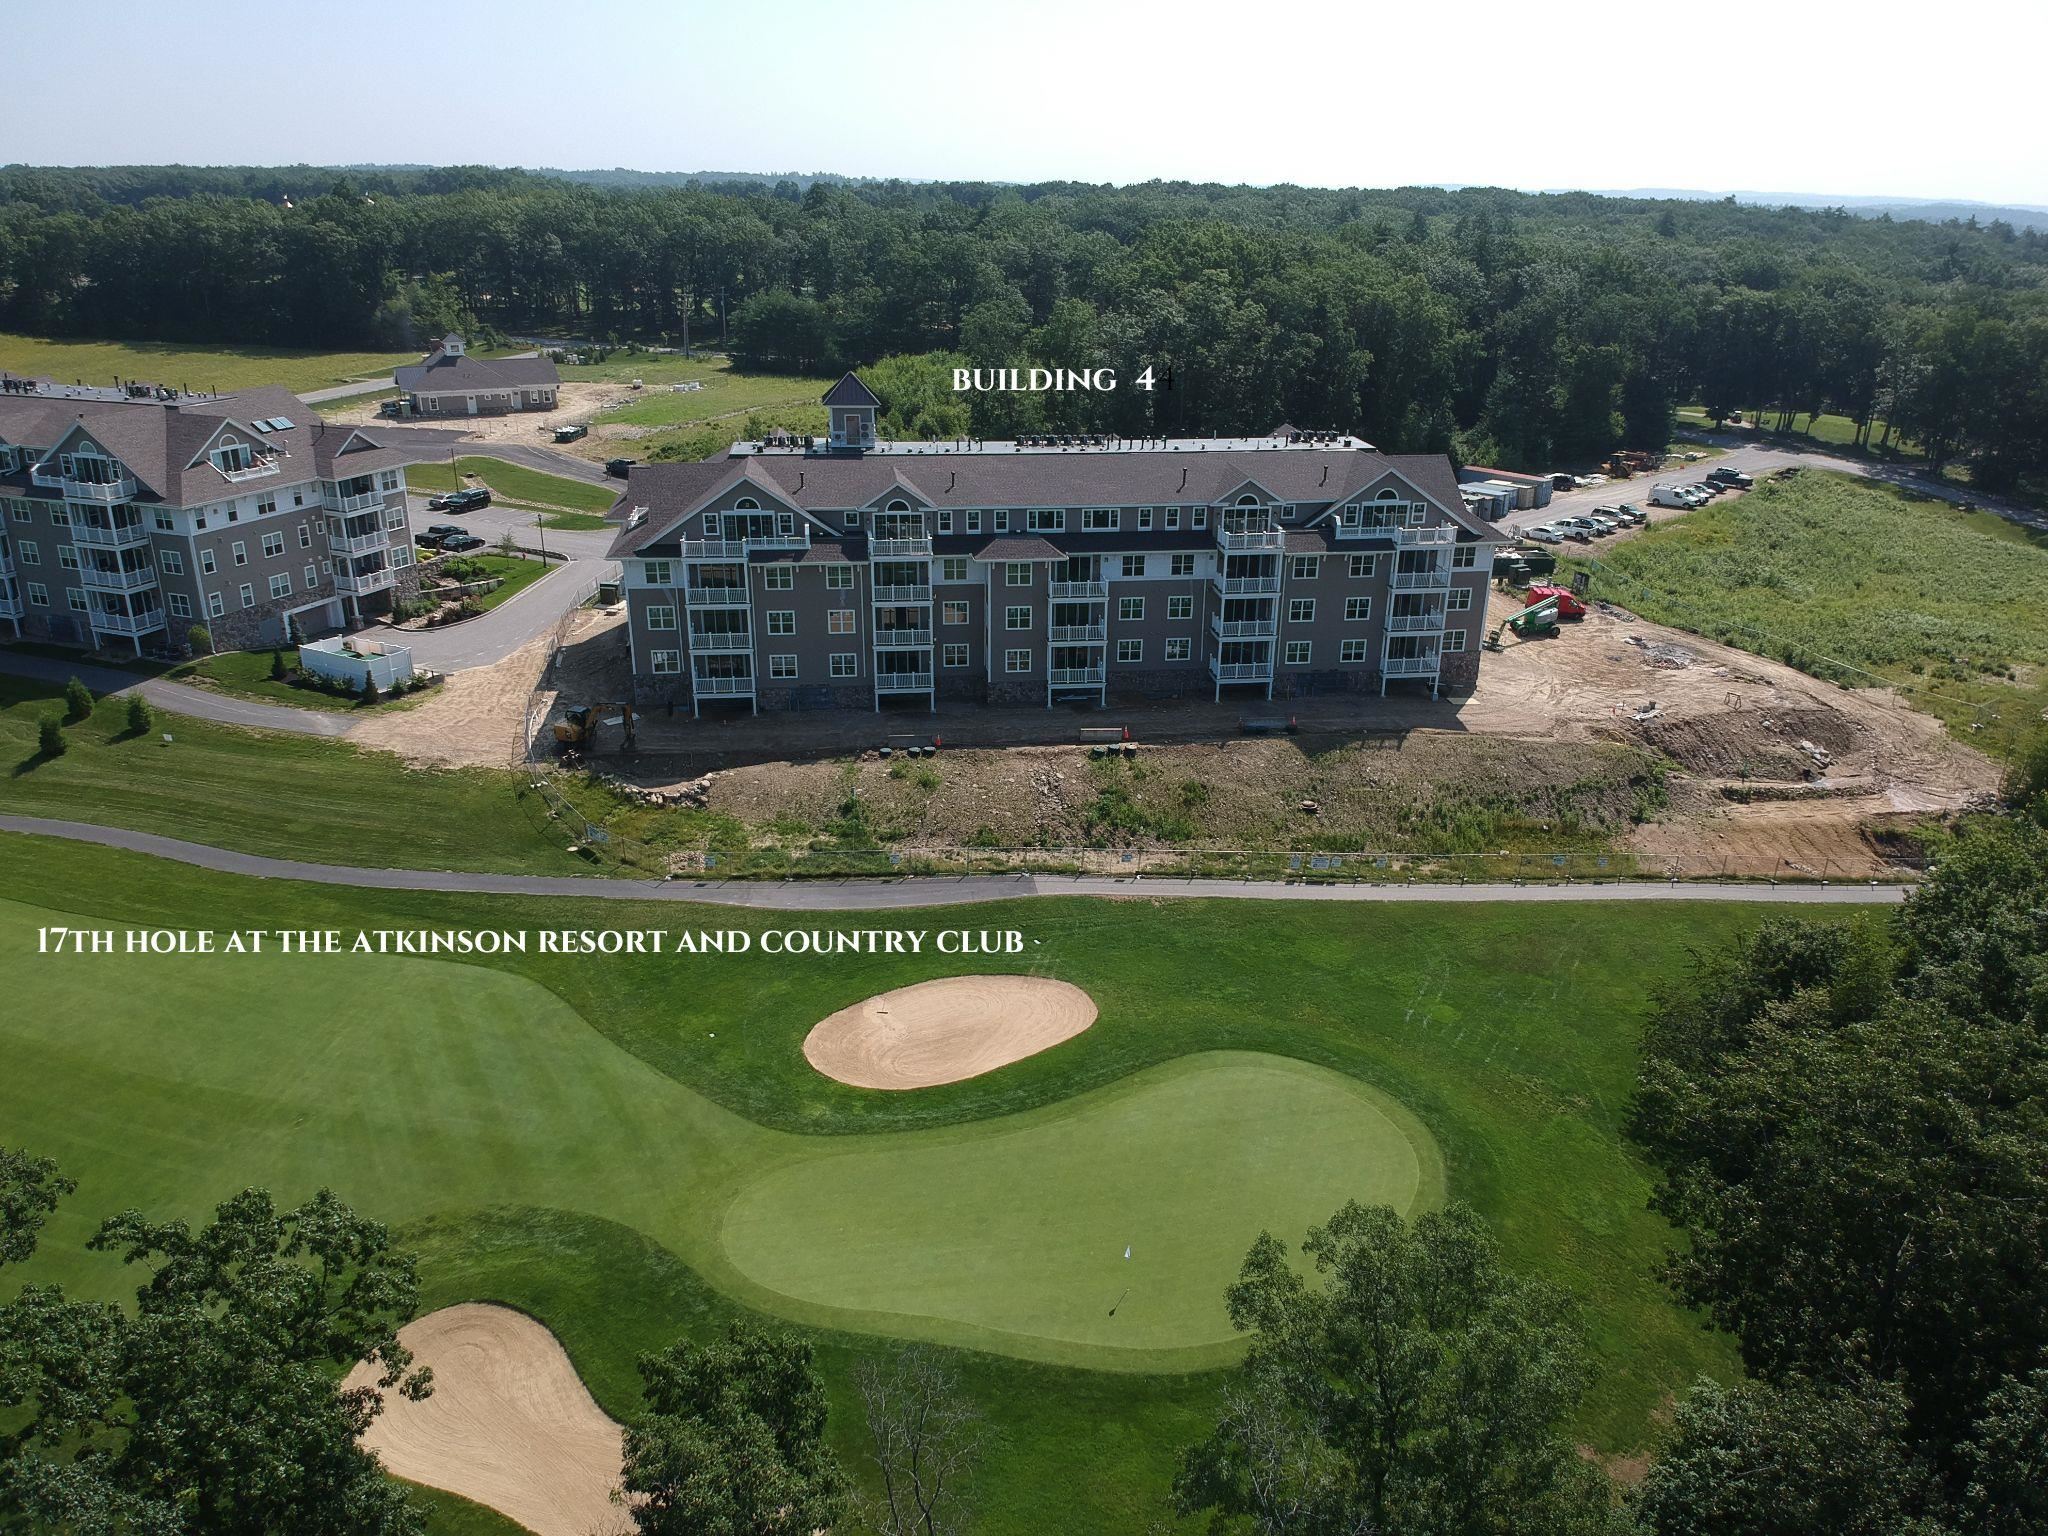 AERIAL VIEW OF BUILDING 4 OVERLOOKING THE 17TH HOLE